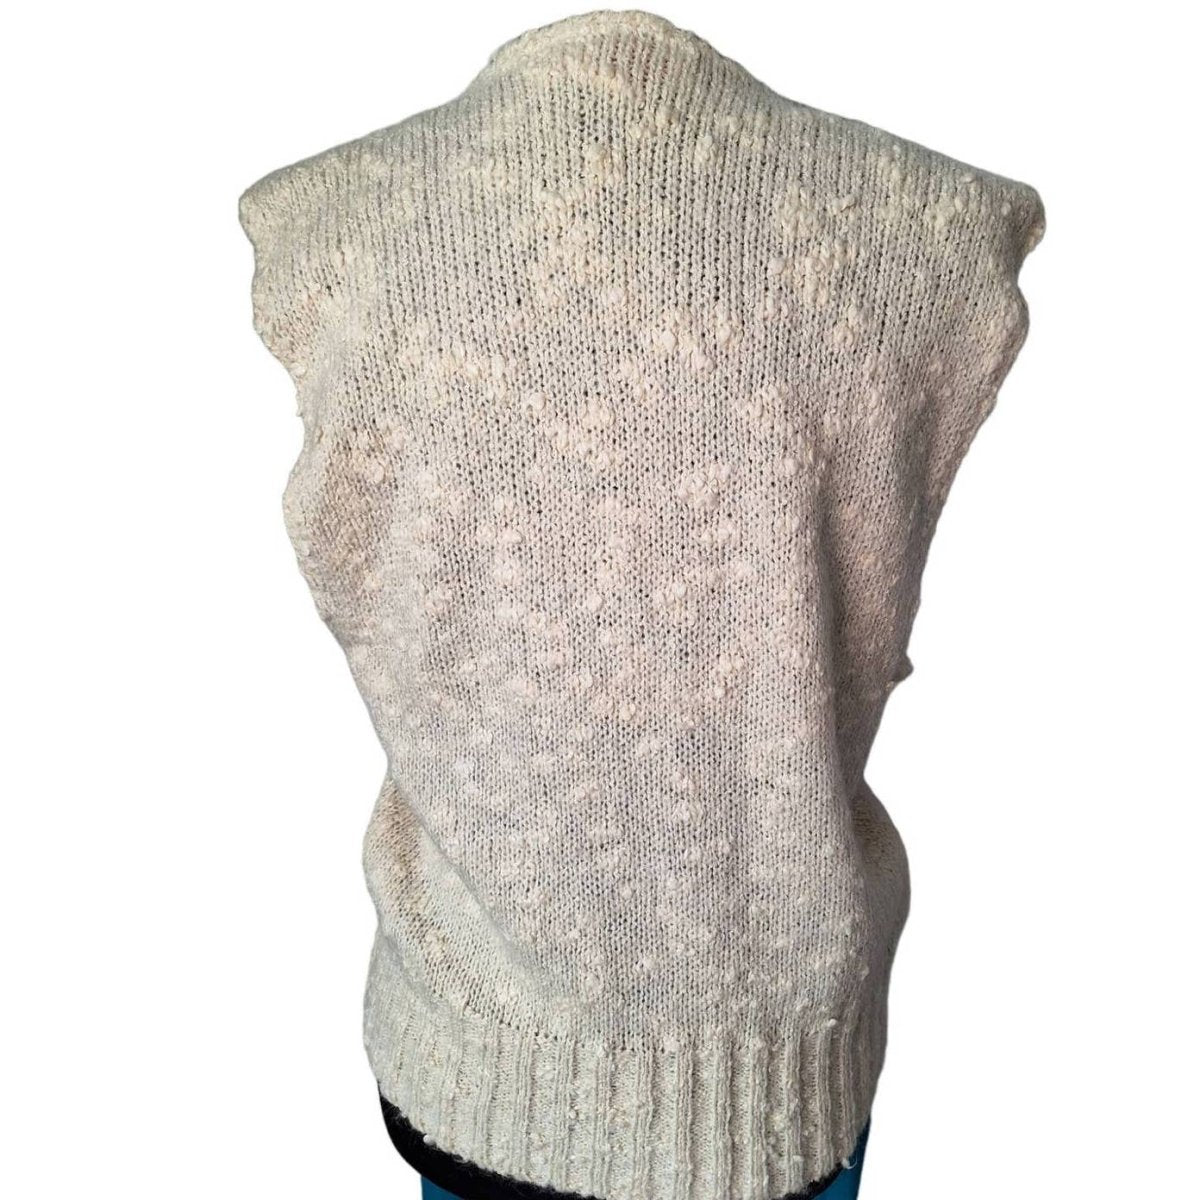 Vintage 80s Cream Wool/Mohair Marled Knit Sweater Vest Women's Size Medium - themallvintage The Mall Vintage